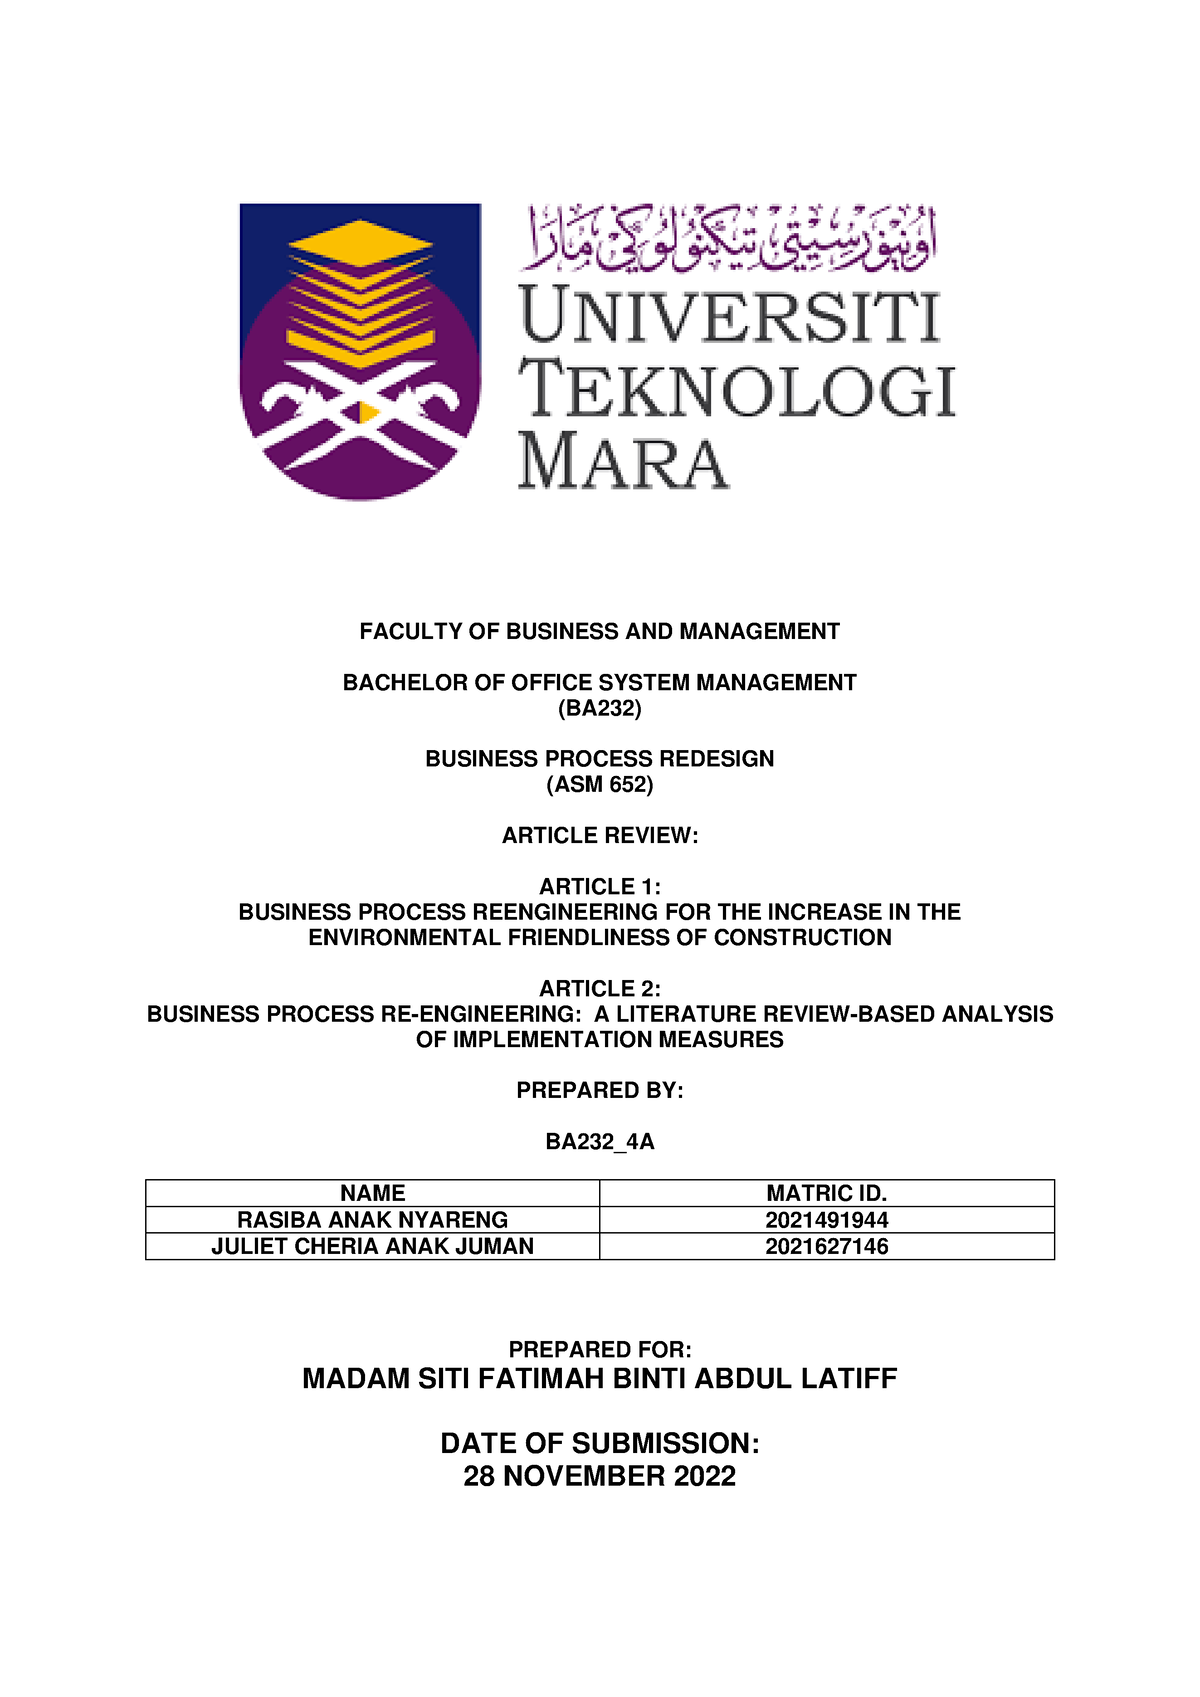 contoh assignment article review uitm